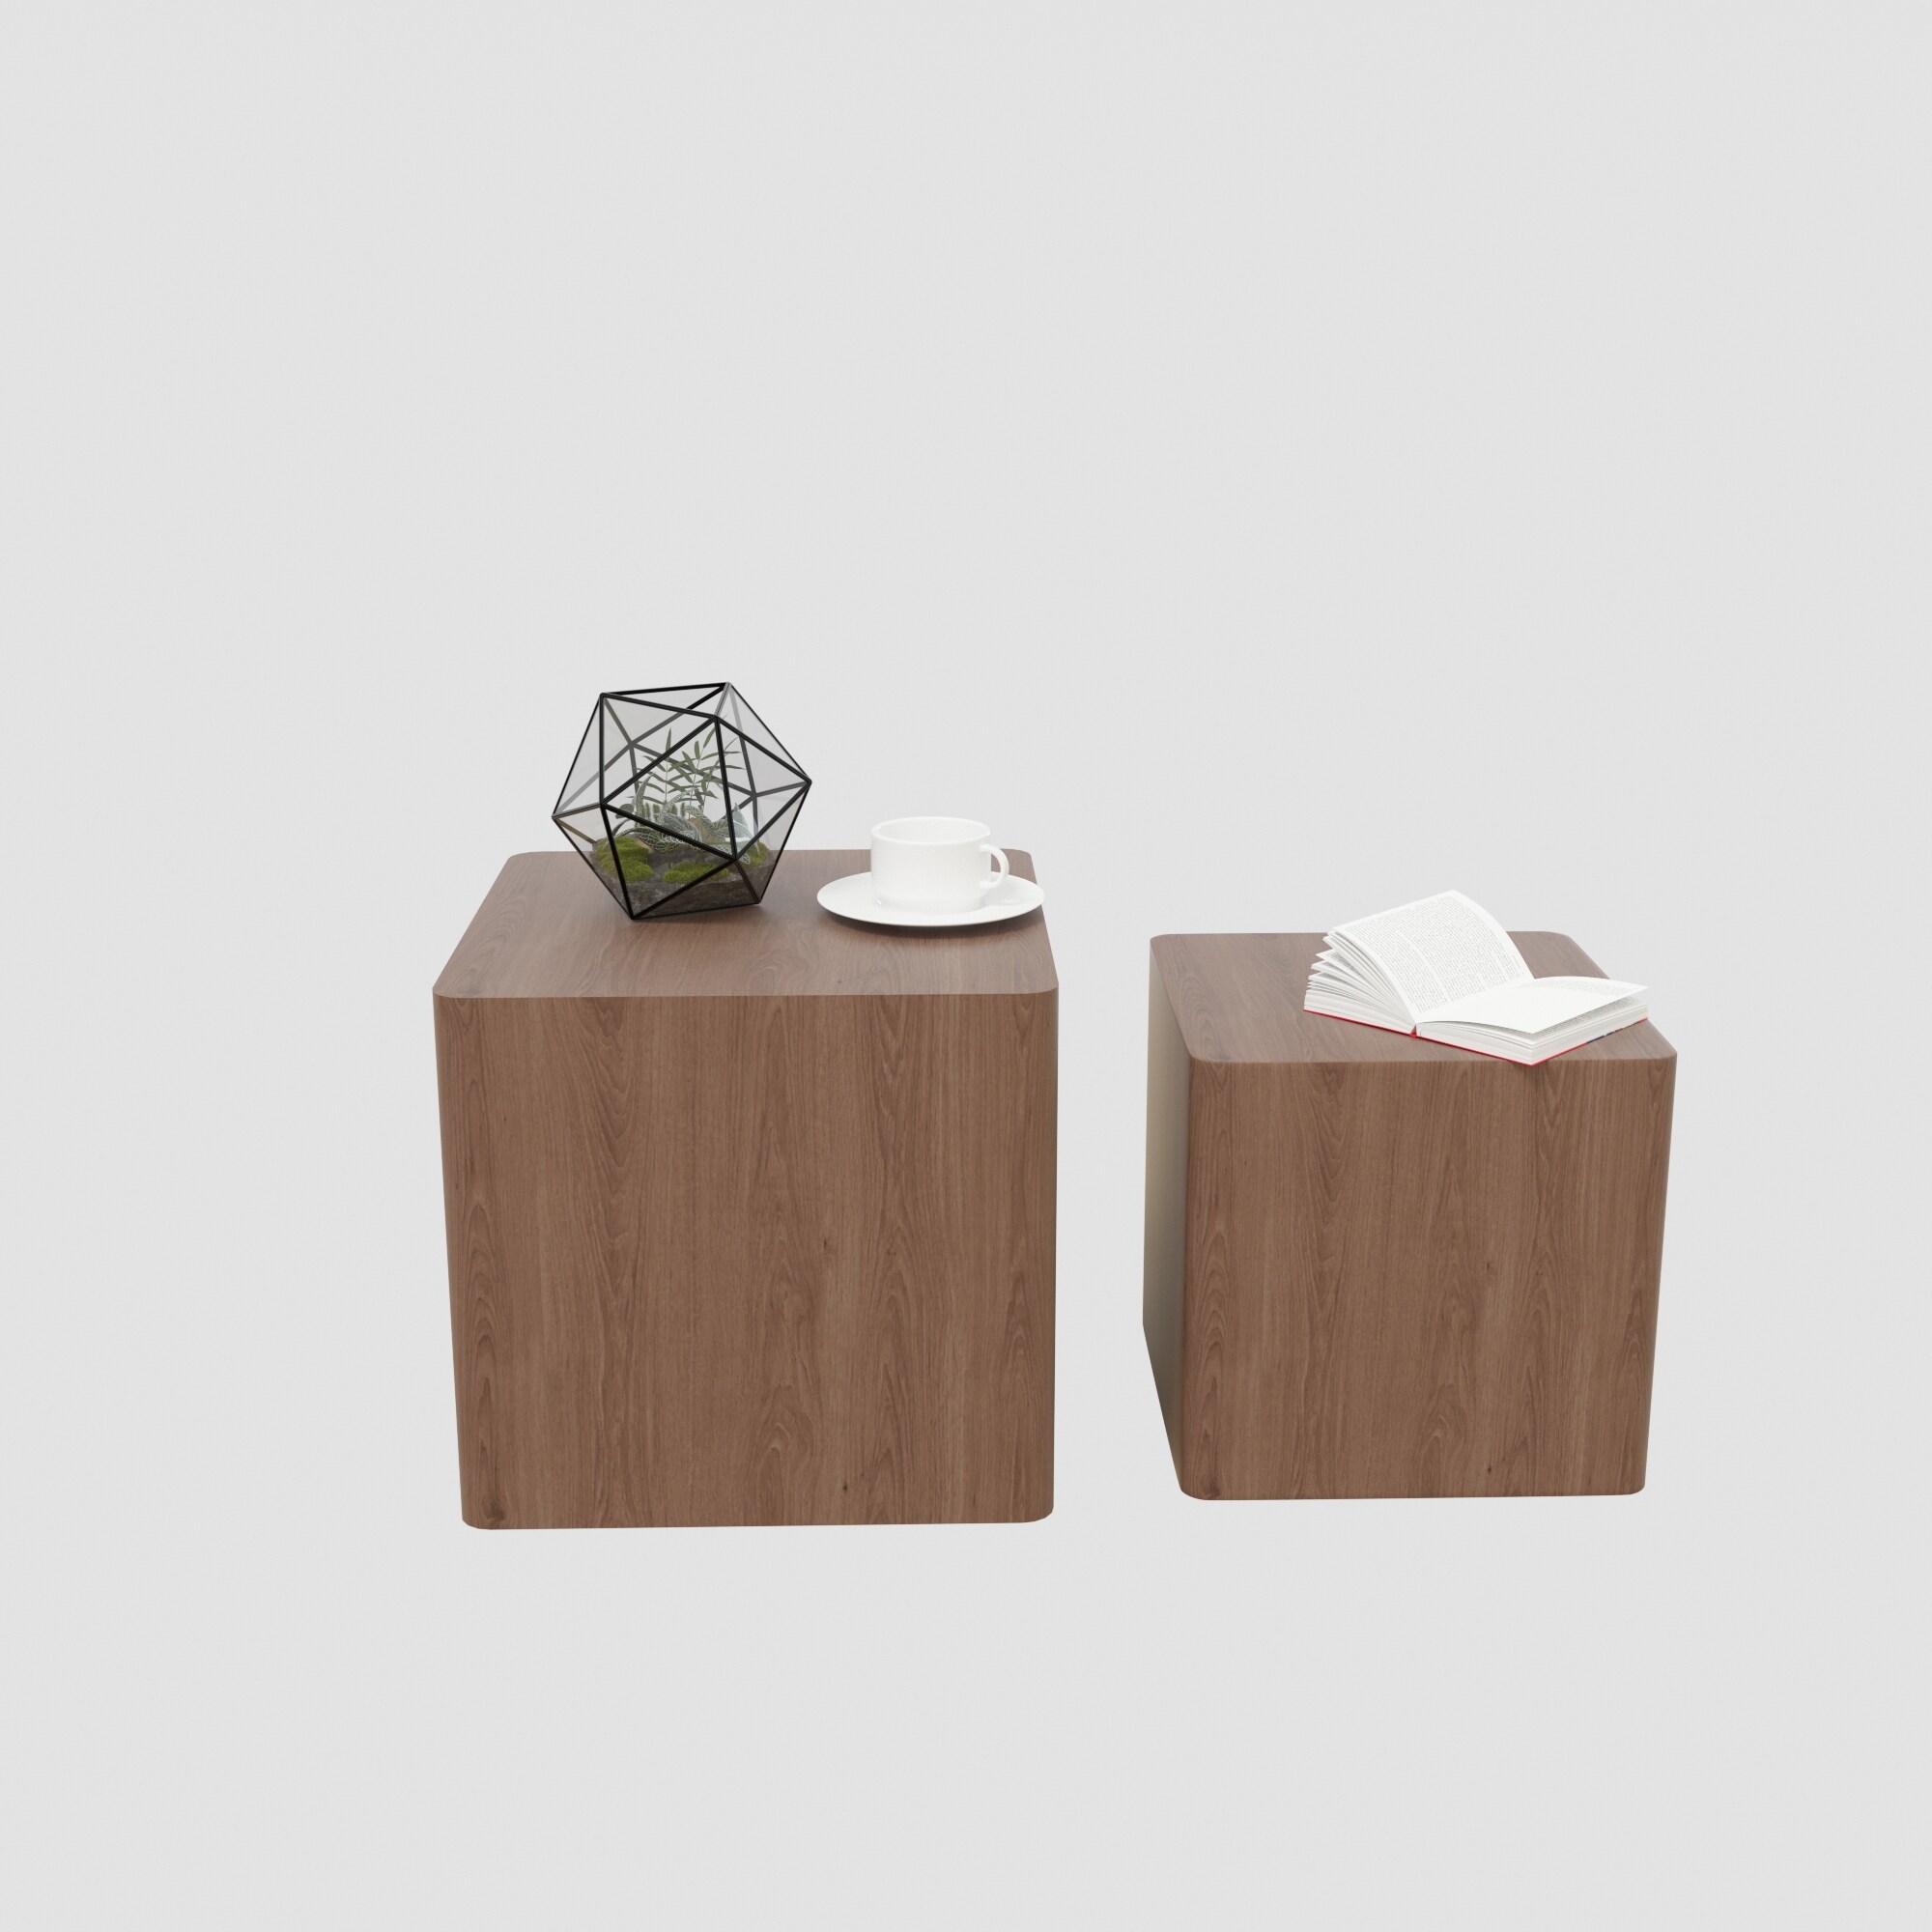 Mdf Nesting Table/Square Side Table/Coffee Table/End Table Set Of 2 for Hallway, Foyer, Den, Living Room, Various Functions